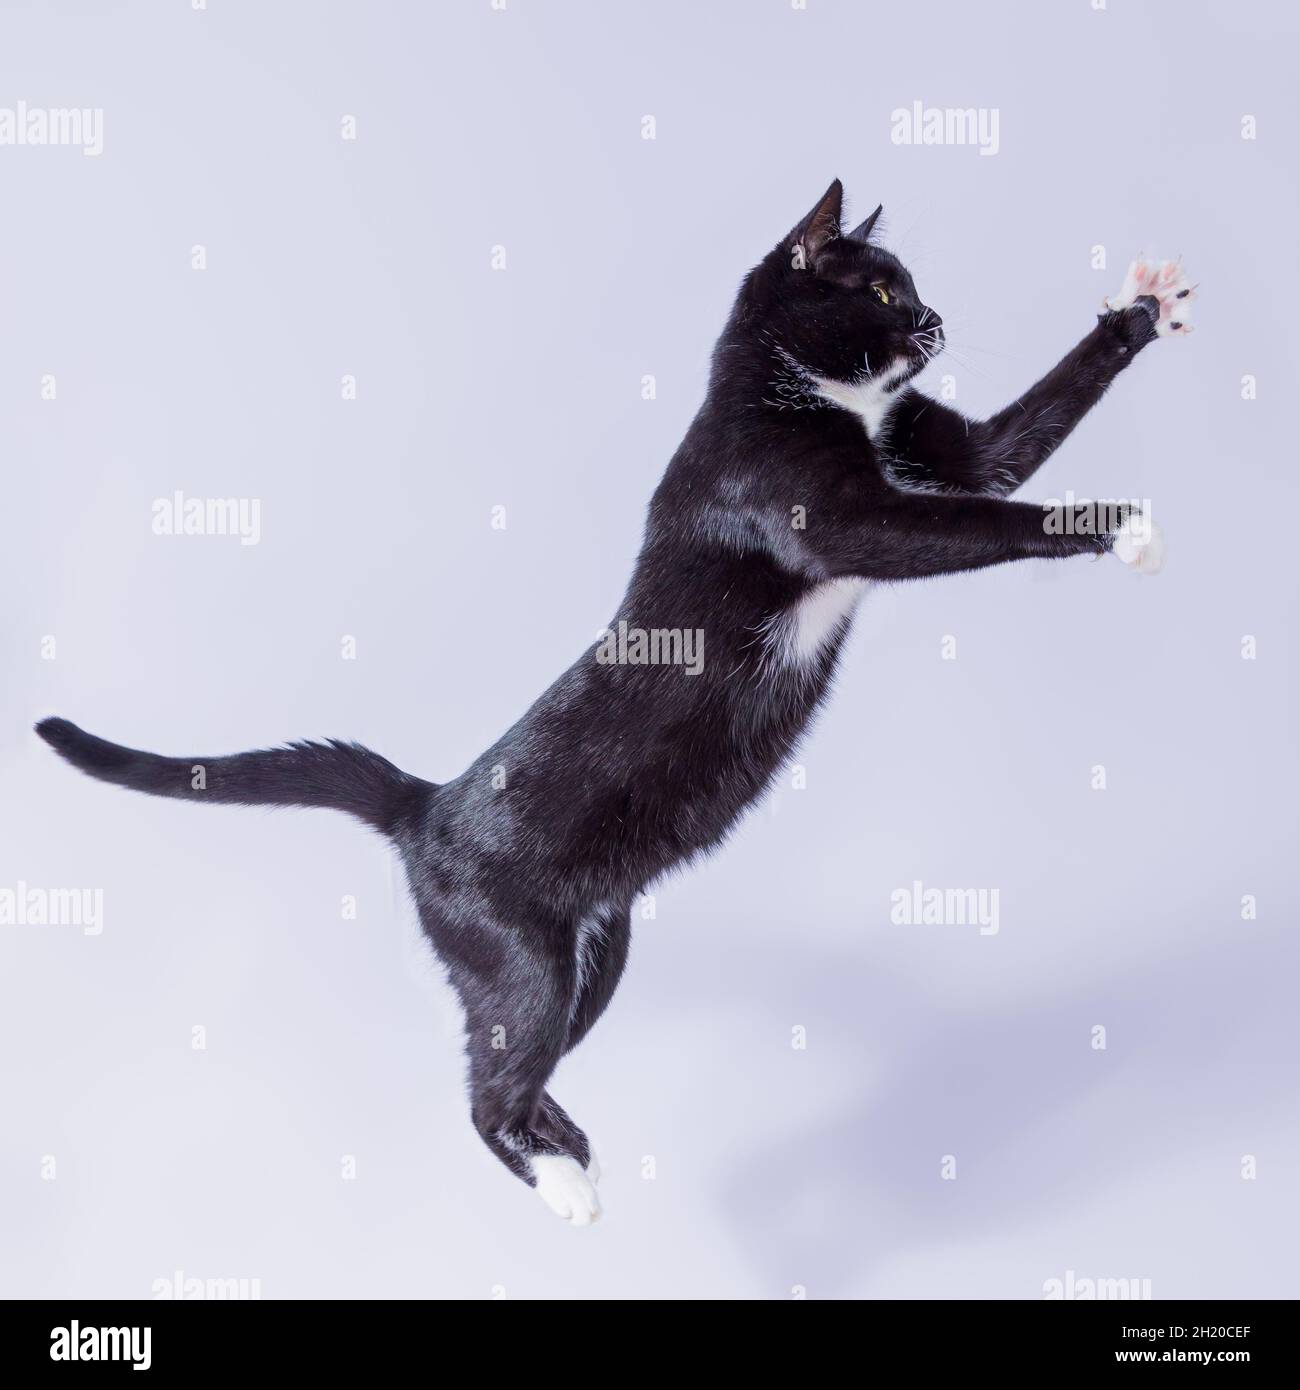 A black tuxedo colored cat is jumping to catch it's prey Stock Photo